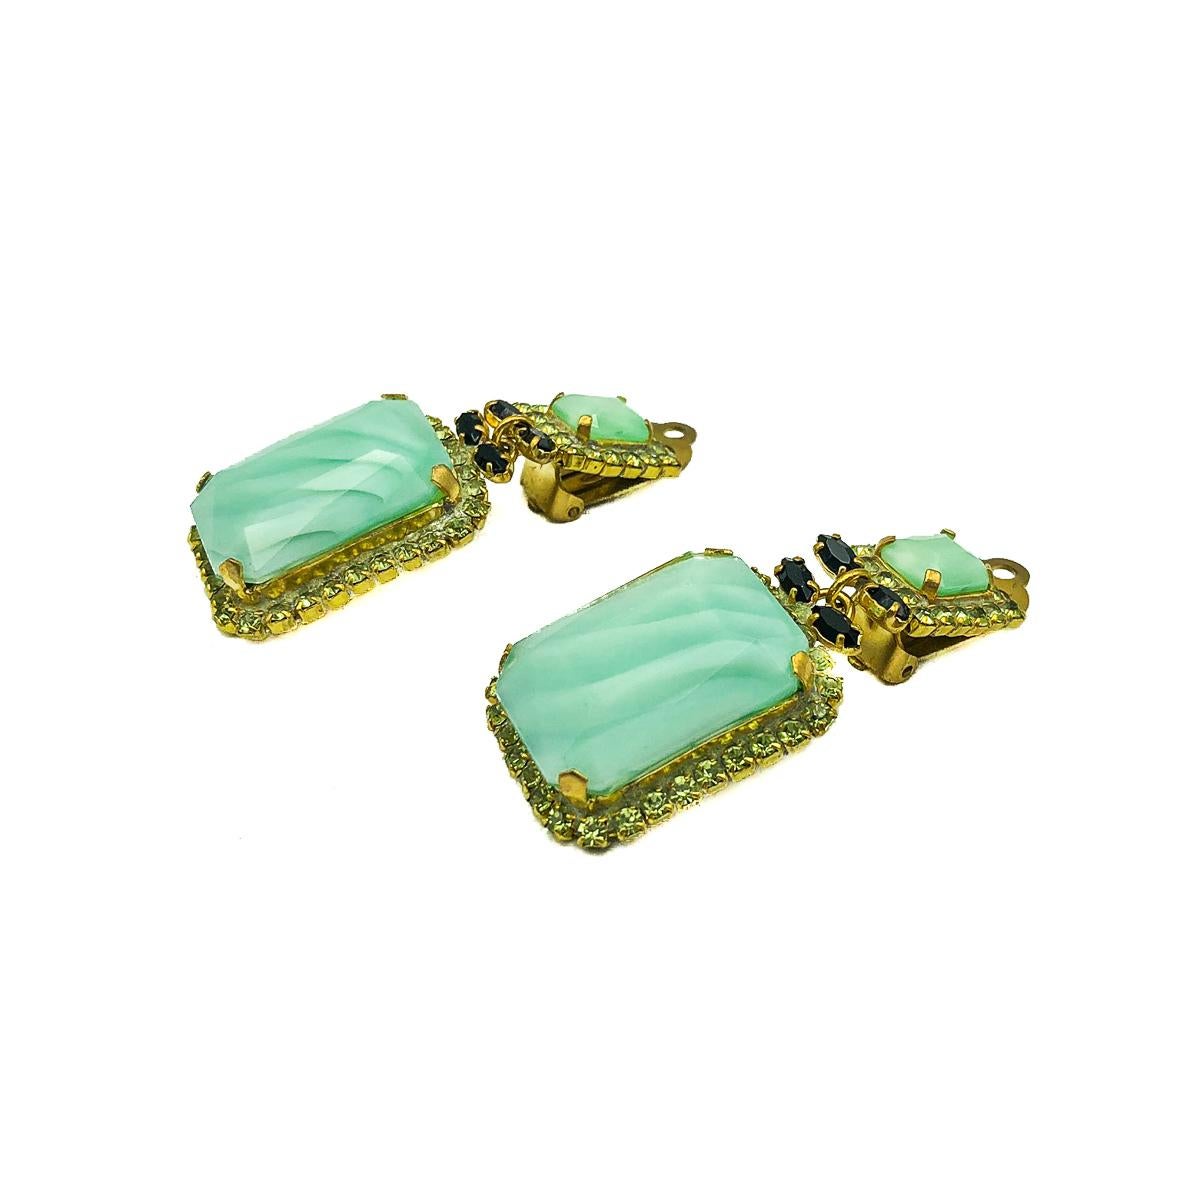 Delightful vintage Green Drop Earrings. Featuring large pastel green art glass stones surrounded by lime green crystal galleries and finished with marquise black crystal accents. All stones are claw set. Good vintage condition, approx. 5cms.